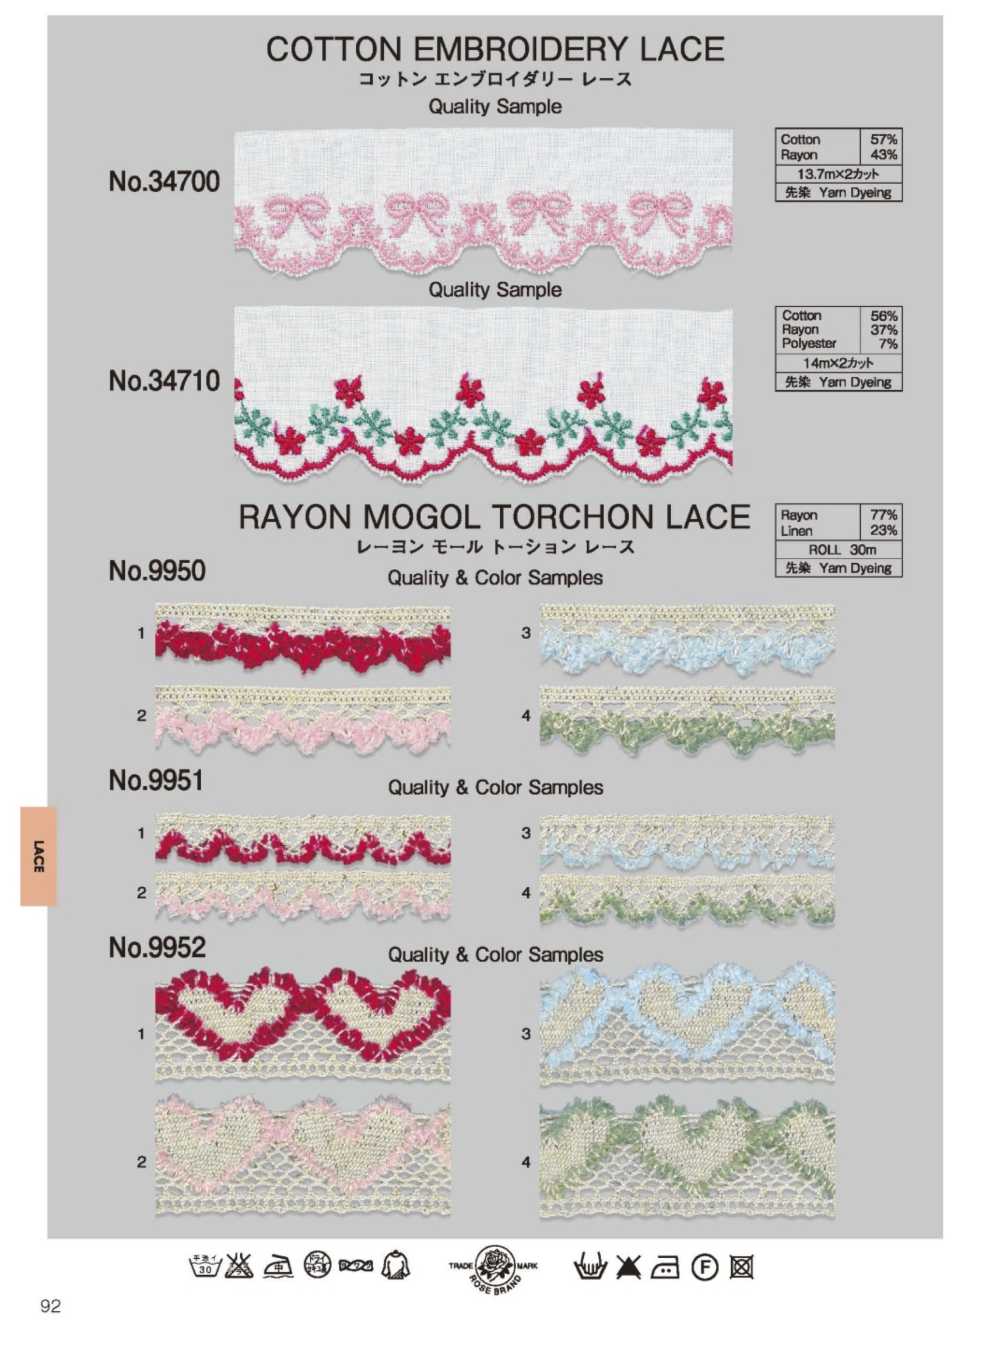 34710 Cotton Embroidered Lace ROSE BRAND (Marushin)